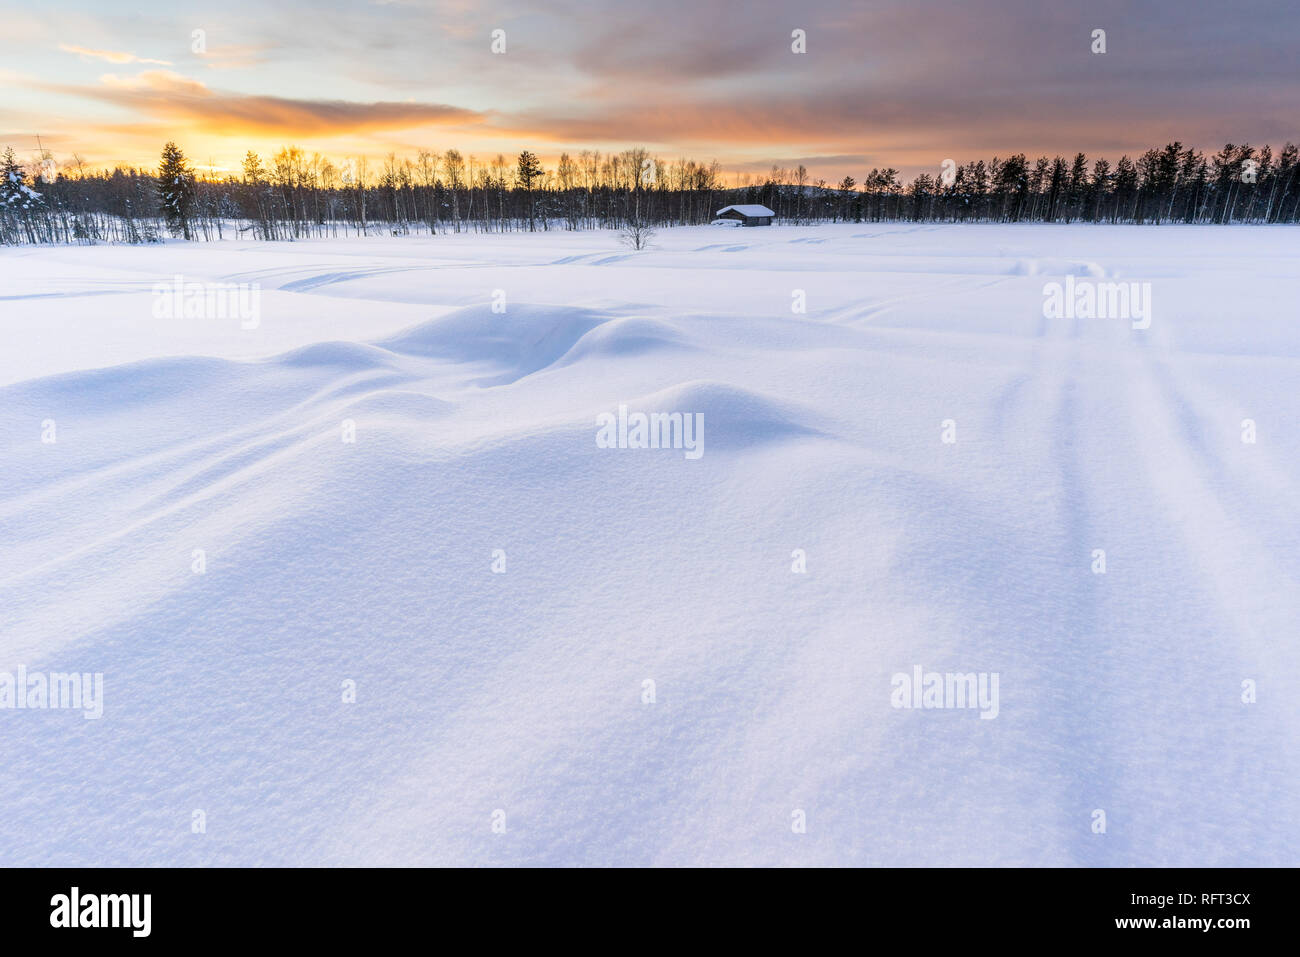 Winter sunset in Finnish Lapland with log cabin and forest in the background, deep snow in the foreground. Picture taken in Pyha, Finland. Stock Photo